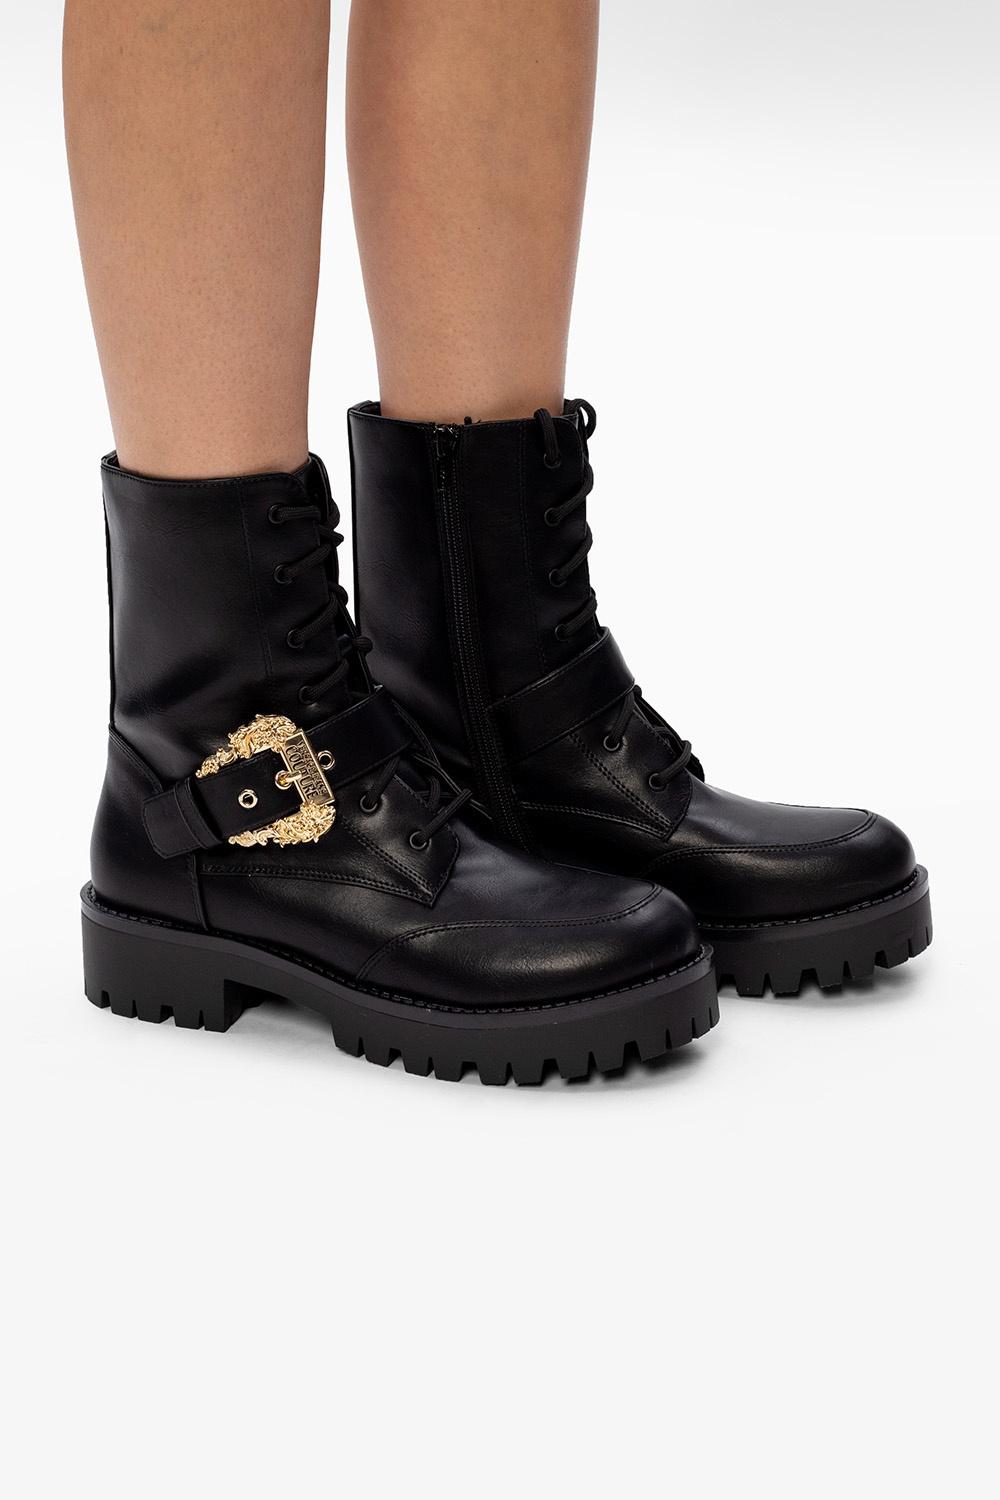 Versace Jeans Denim Ankle Boots With Logo Black - Lyst